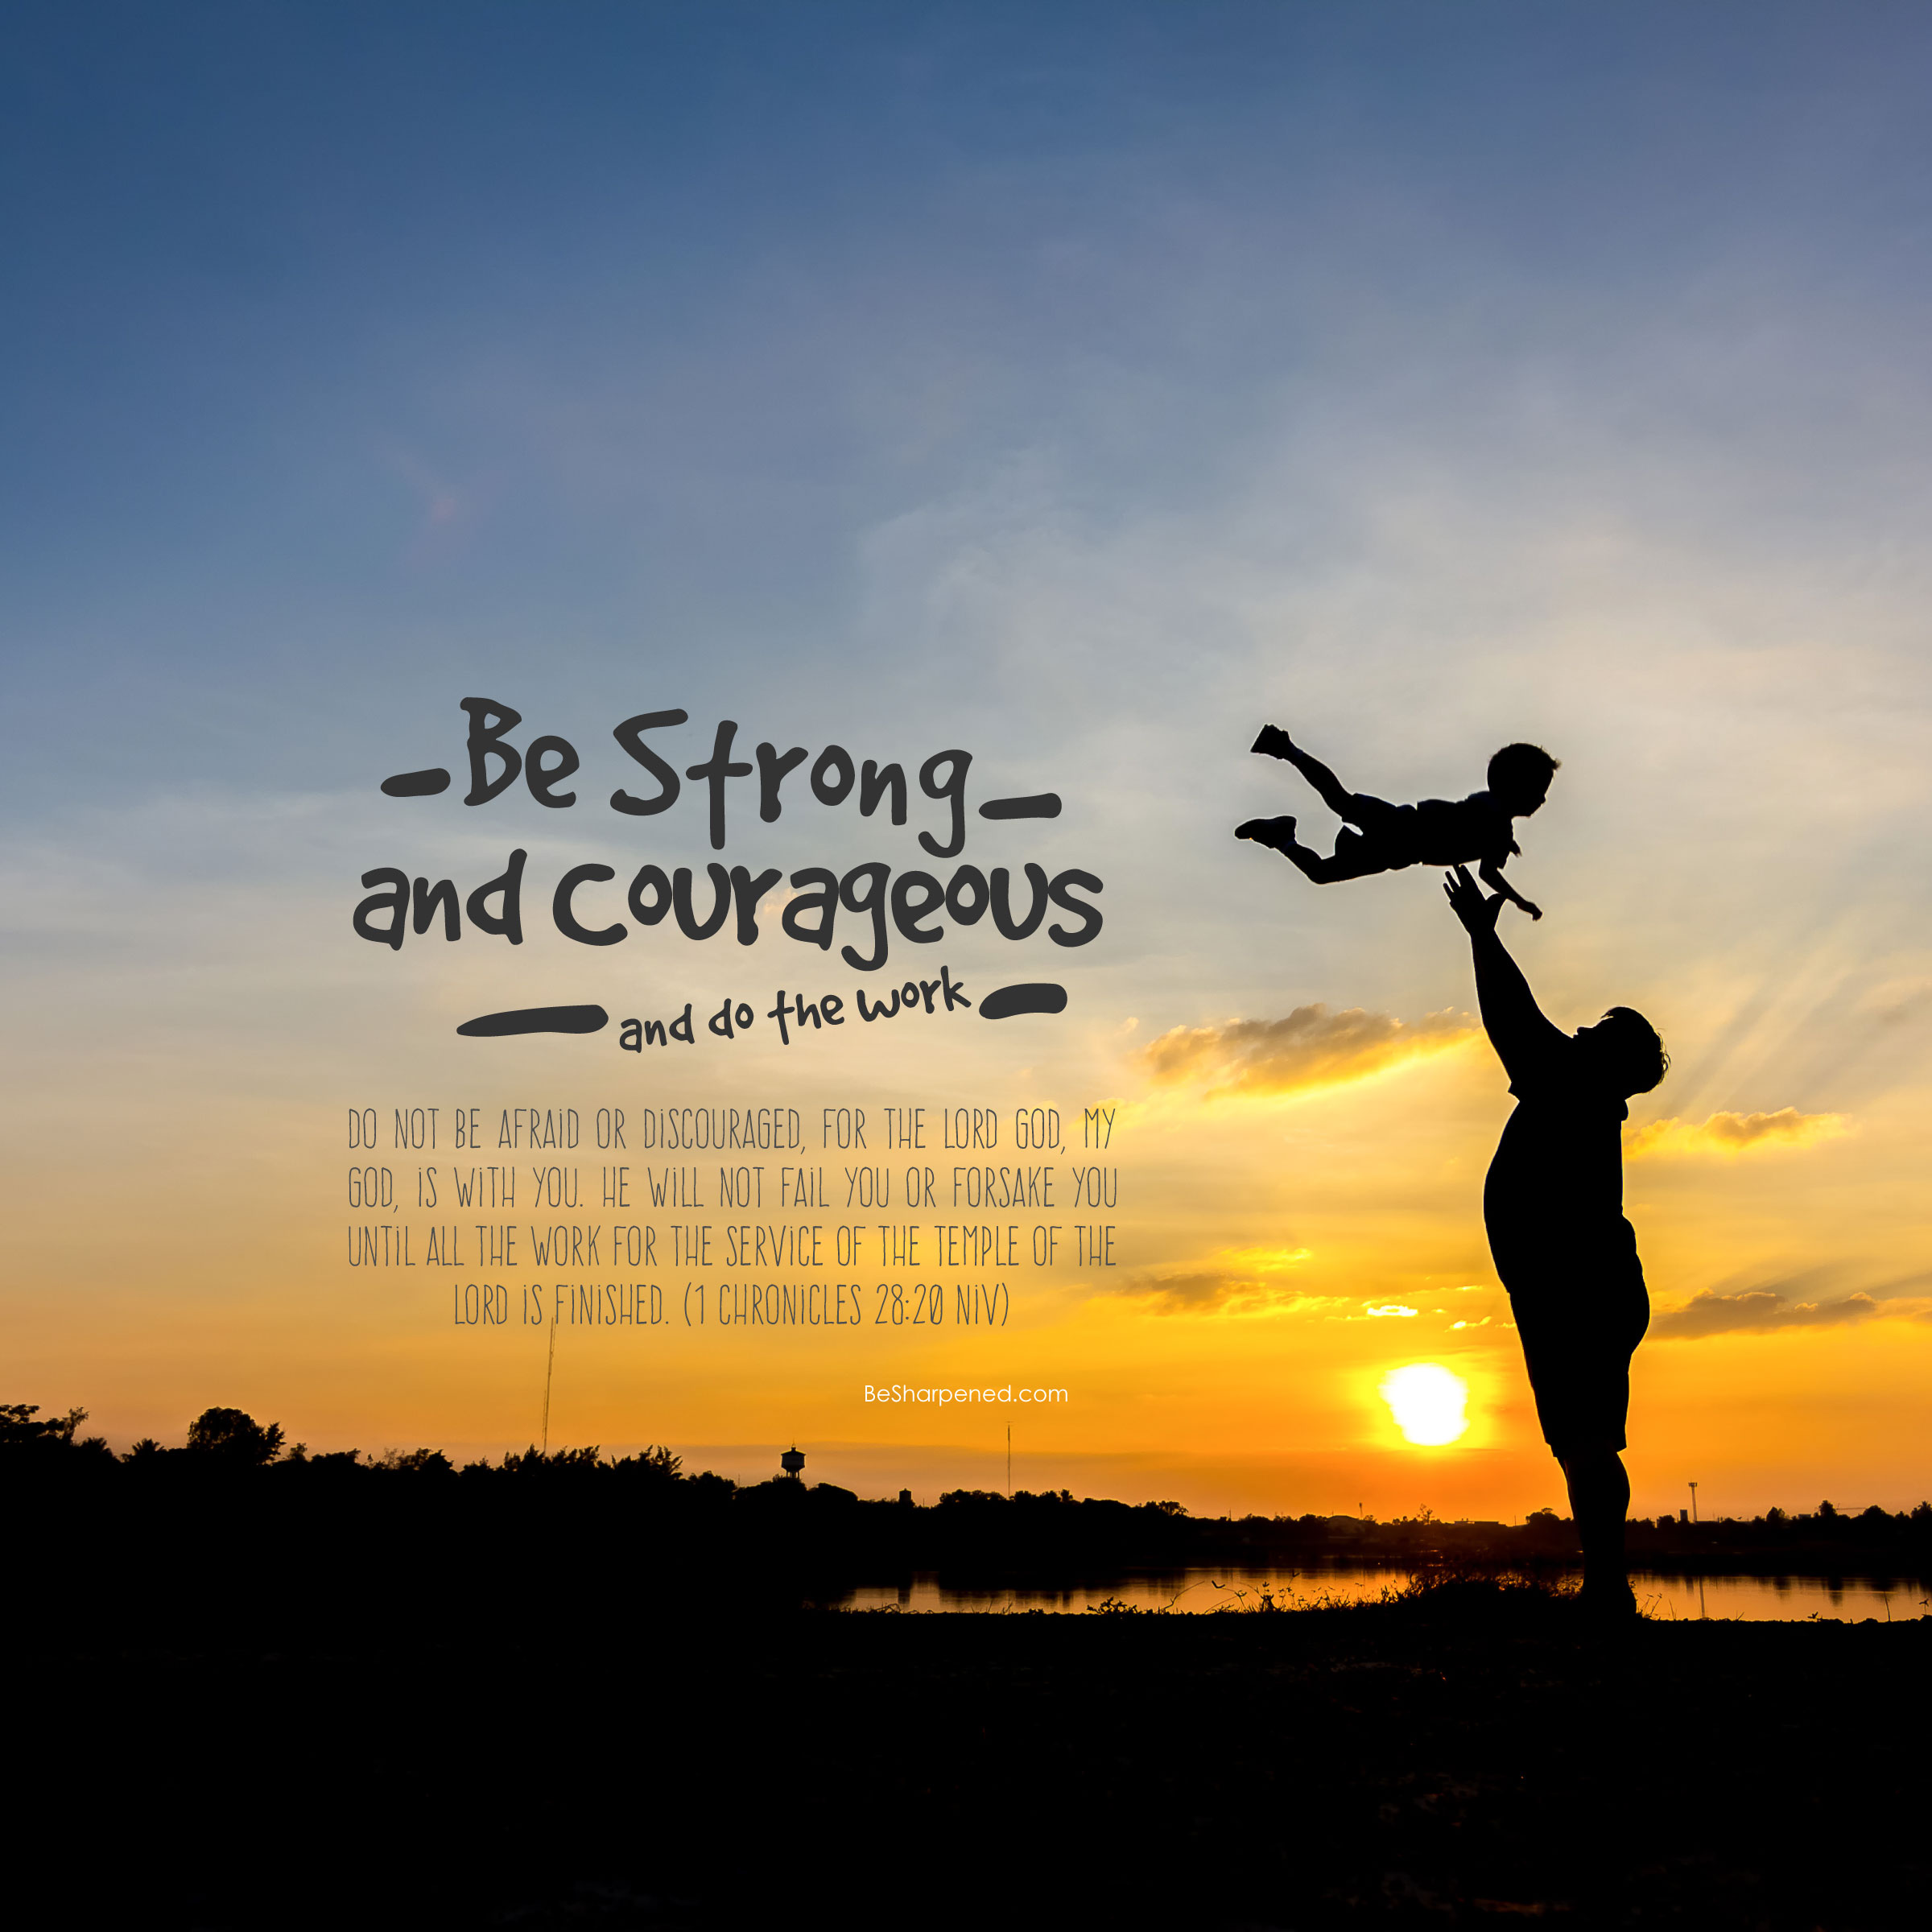 1 chronicles 28:20 - be strong and courageous